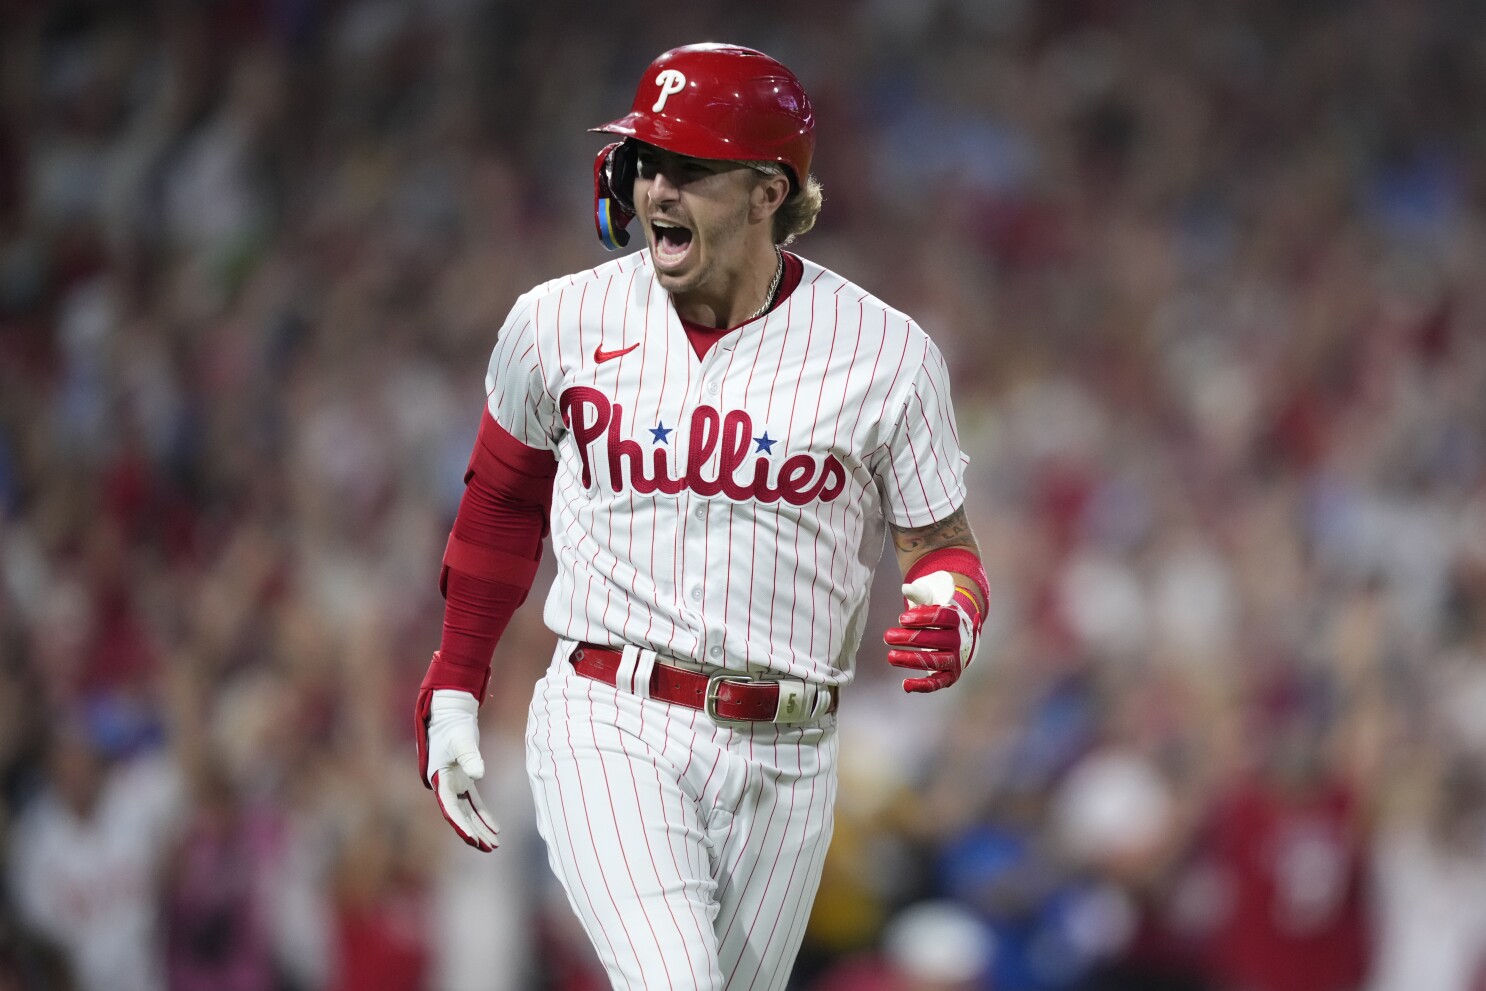 The Phillies are bringing back photo night